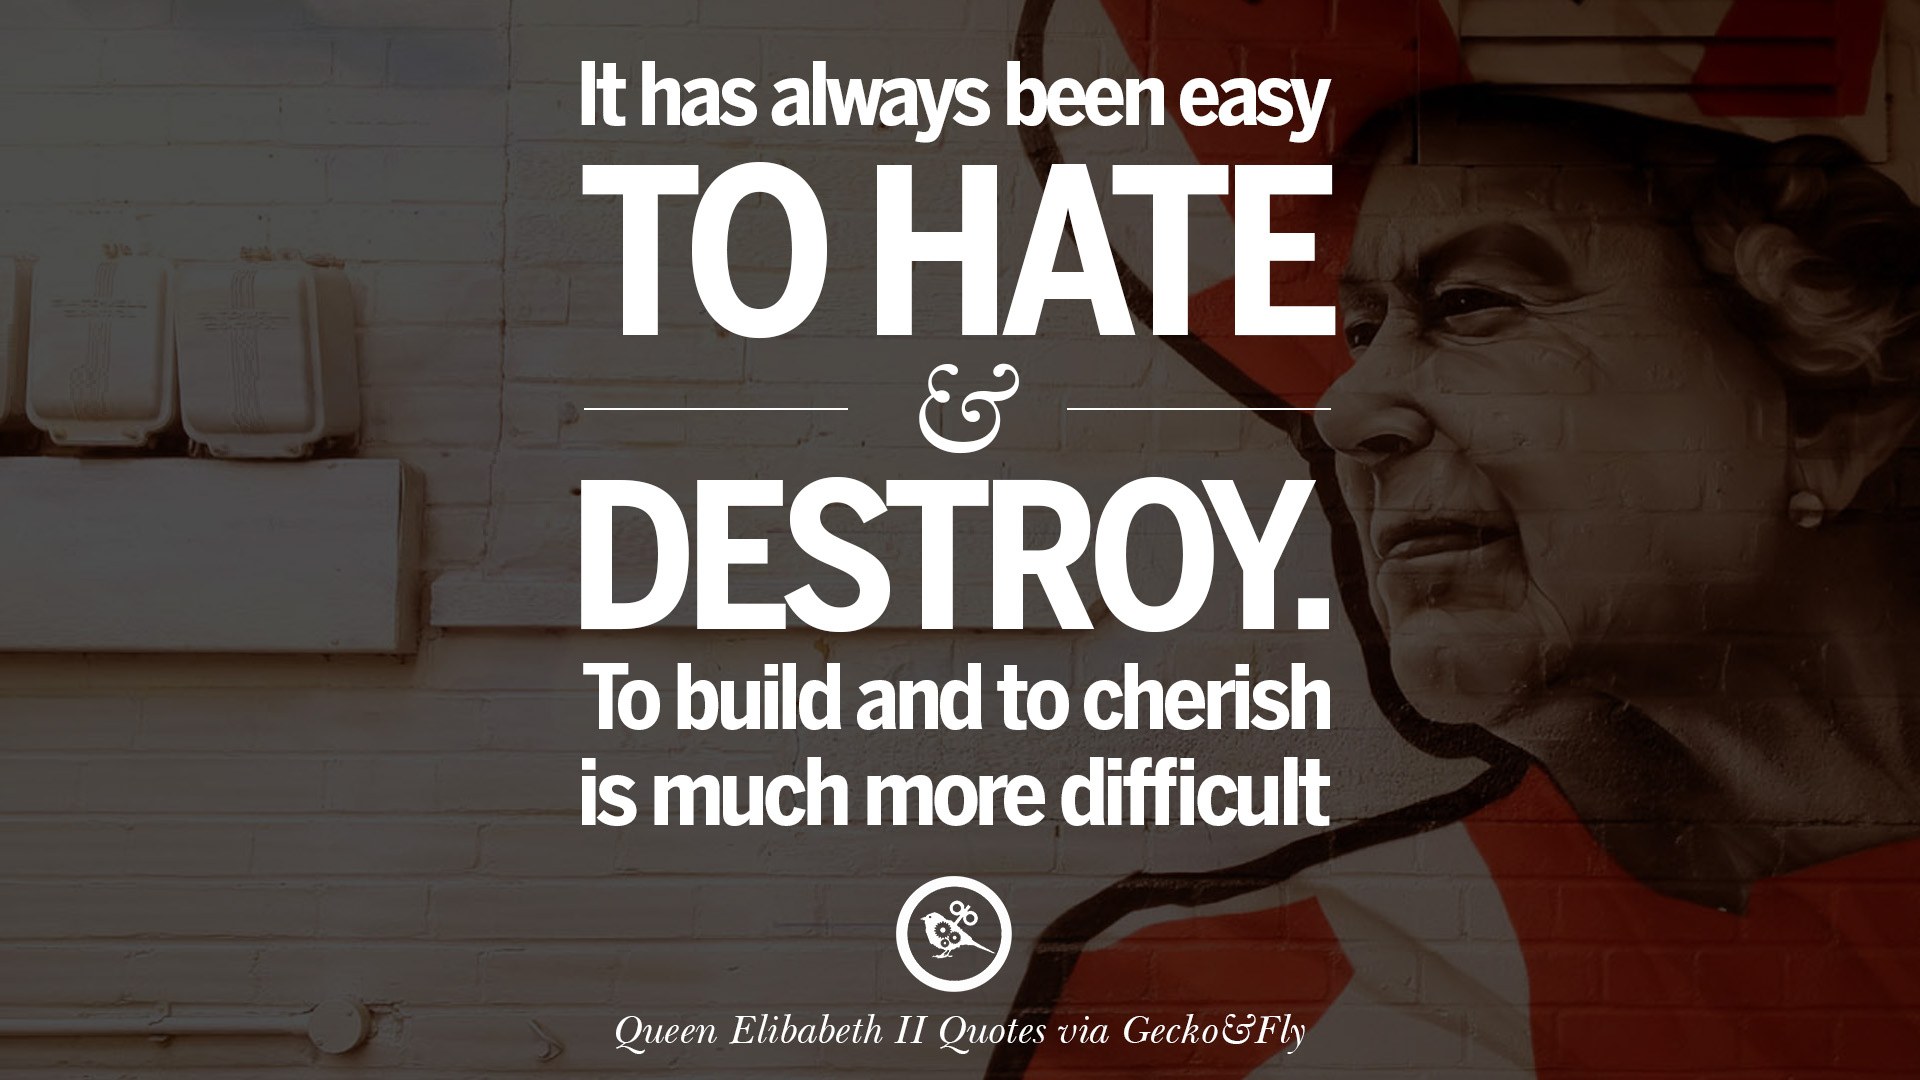 It has always been easy to hate and destroy To build and to cherish is